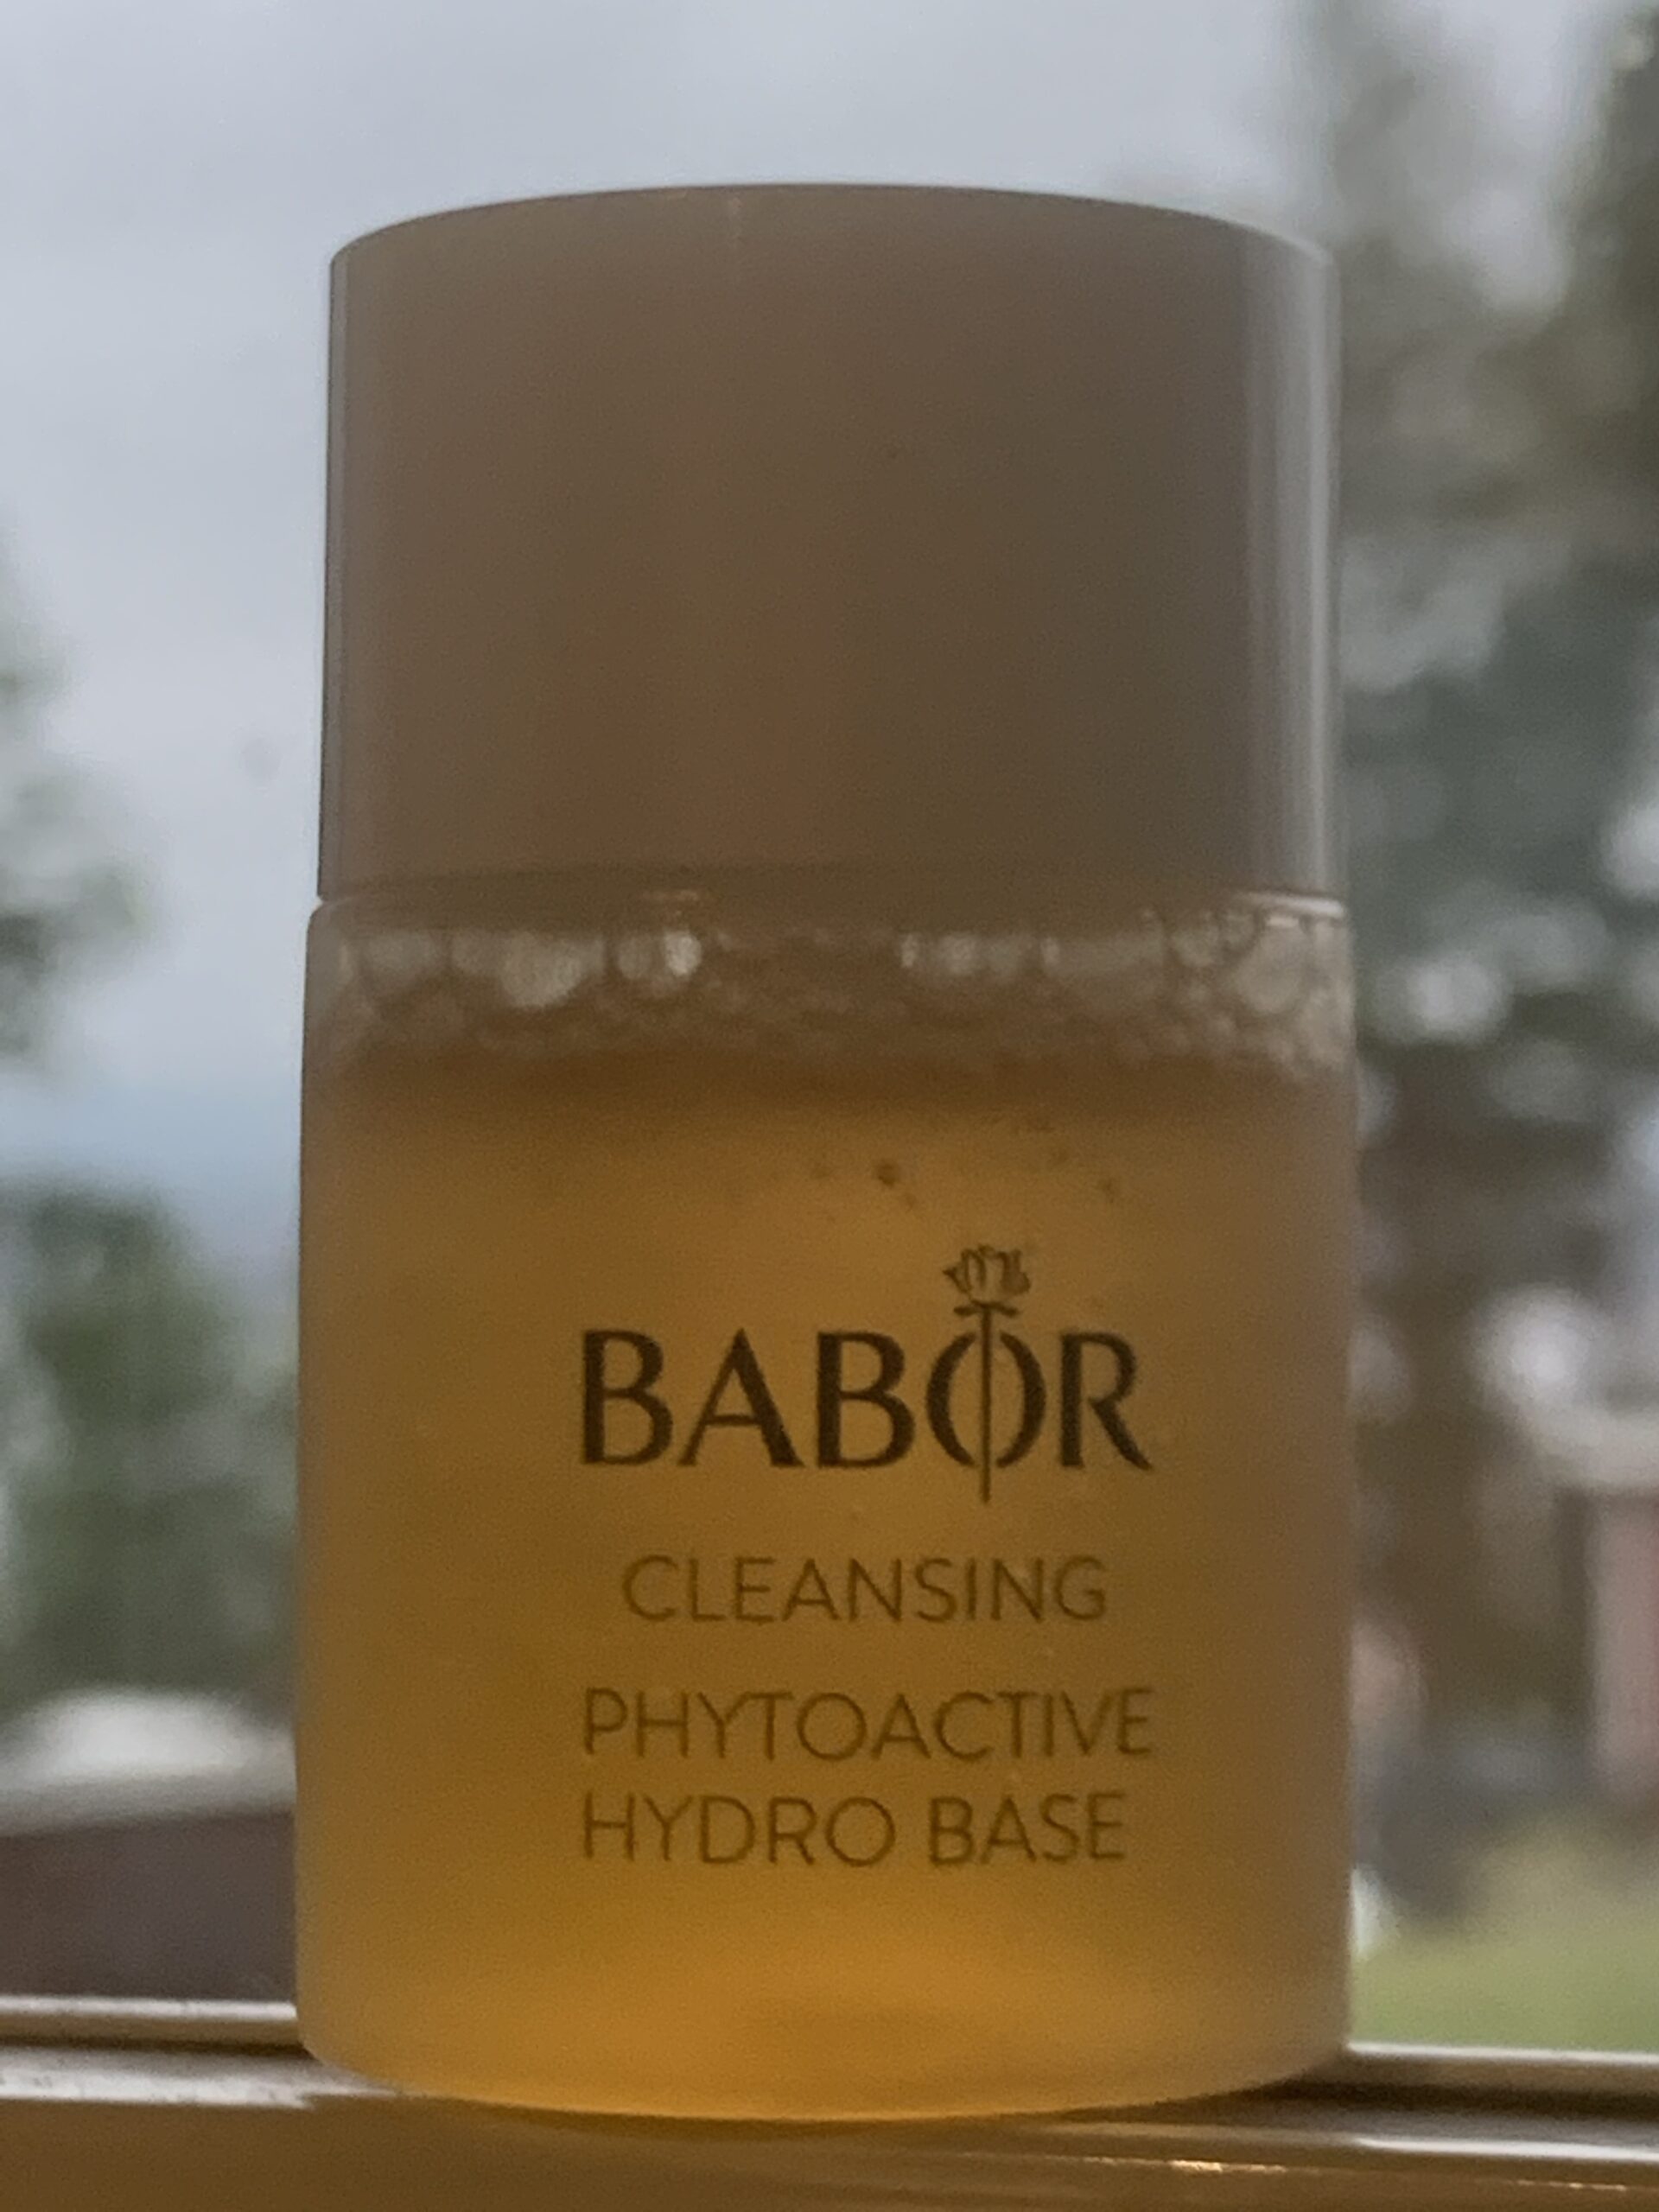 Babor cleansing phytoactive hydro base